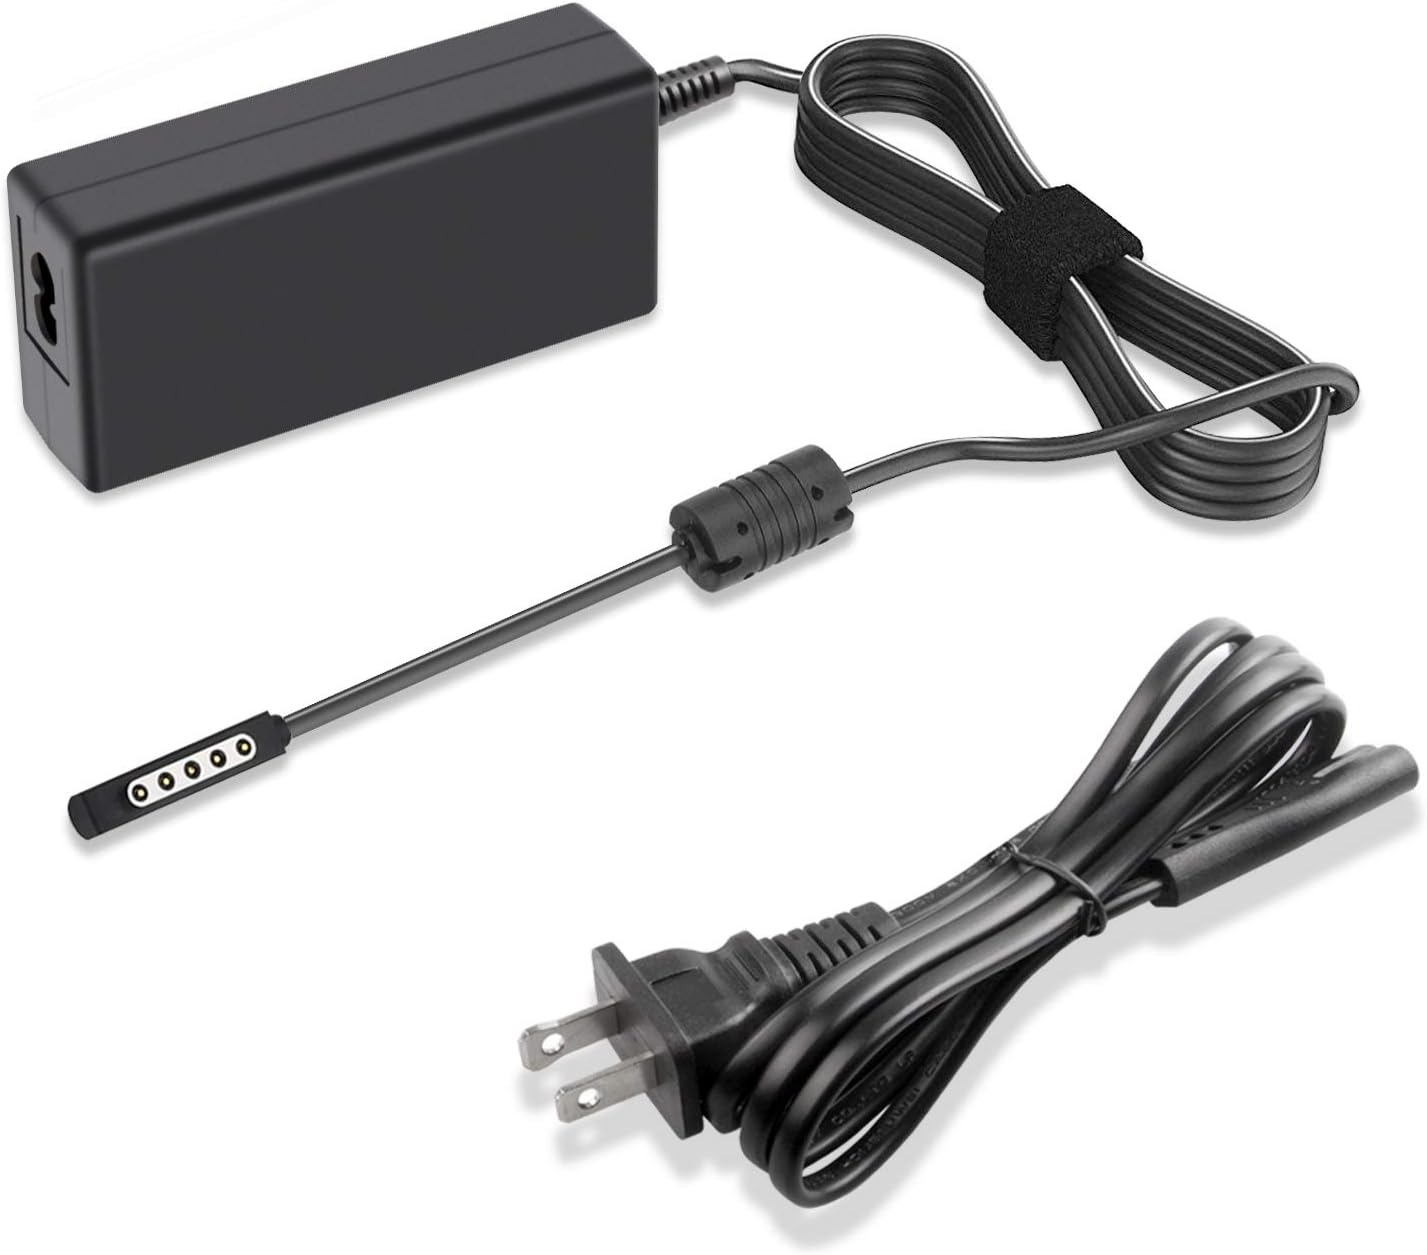 48W 12V 3.58A AC Adapter Charger for Microsoft Surface Pro 2 Surface Pro 1 Surface RT Connectivity Technology Five-pin